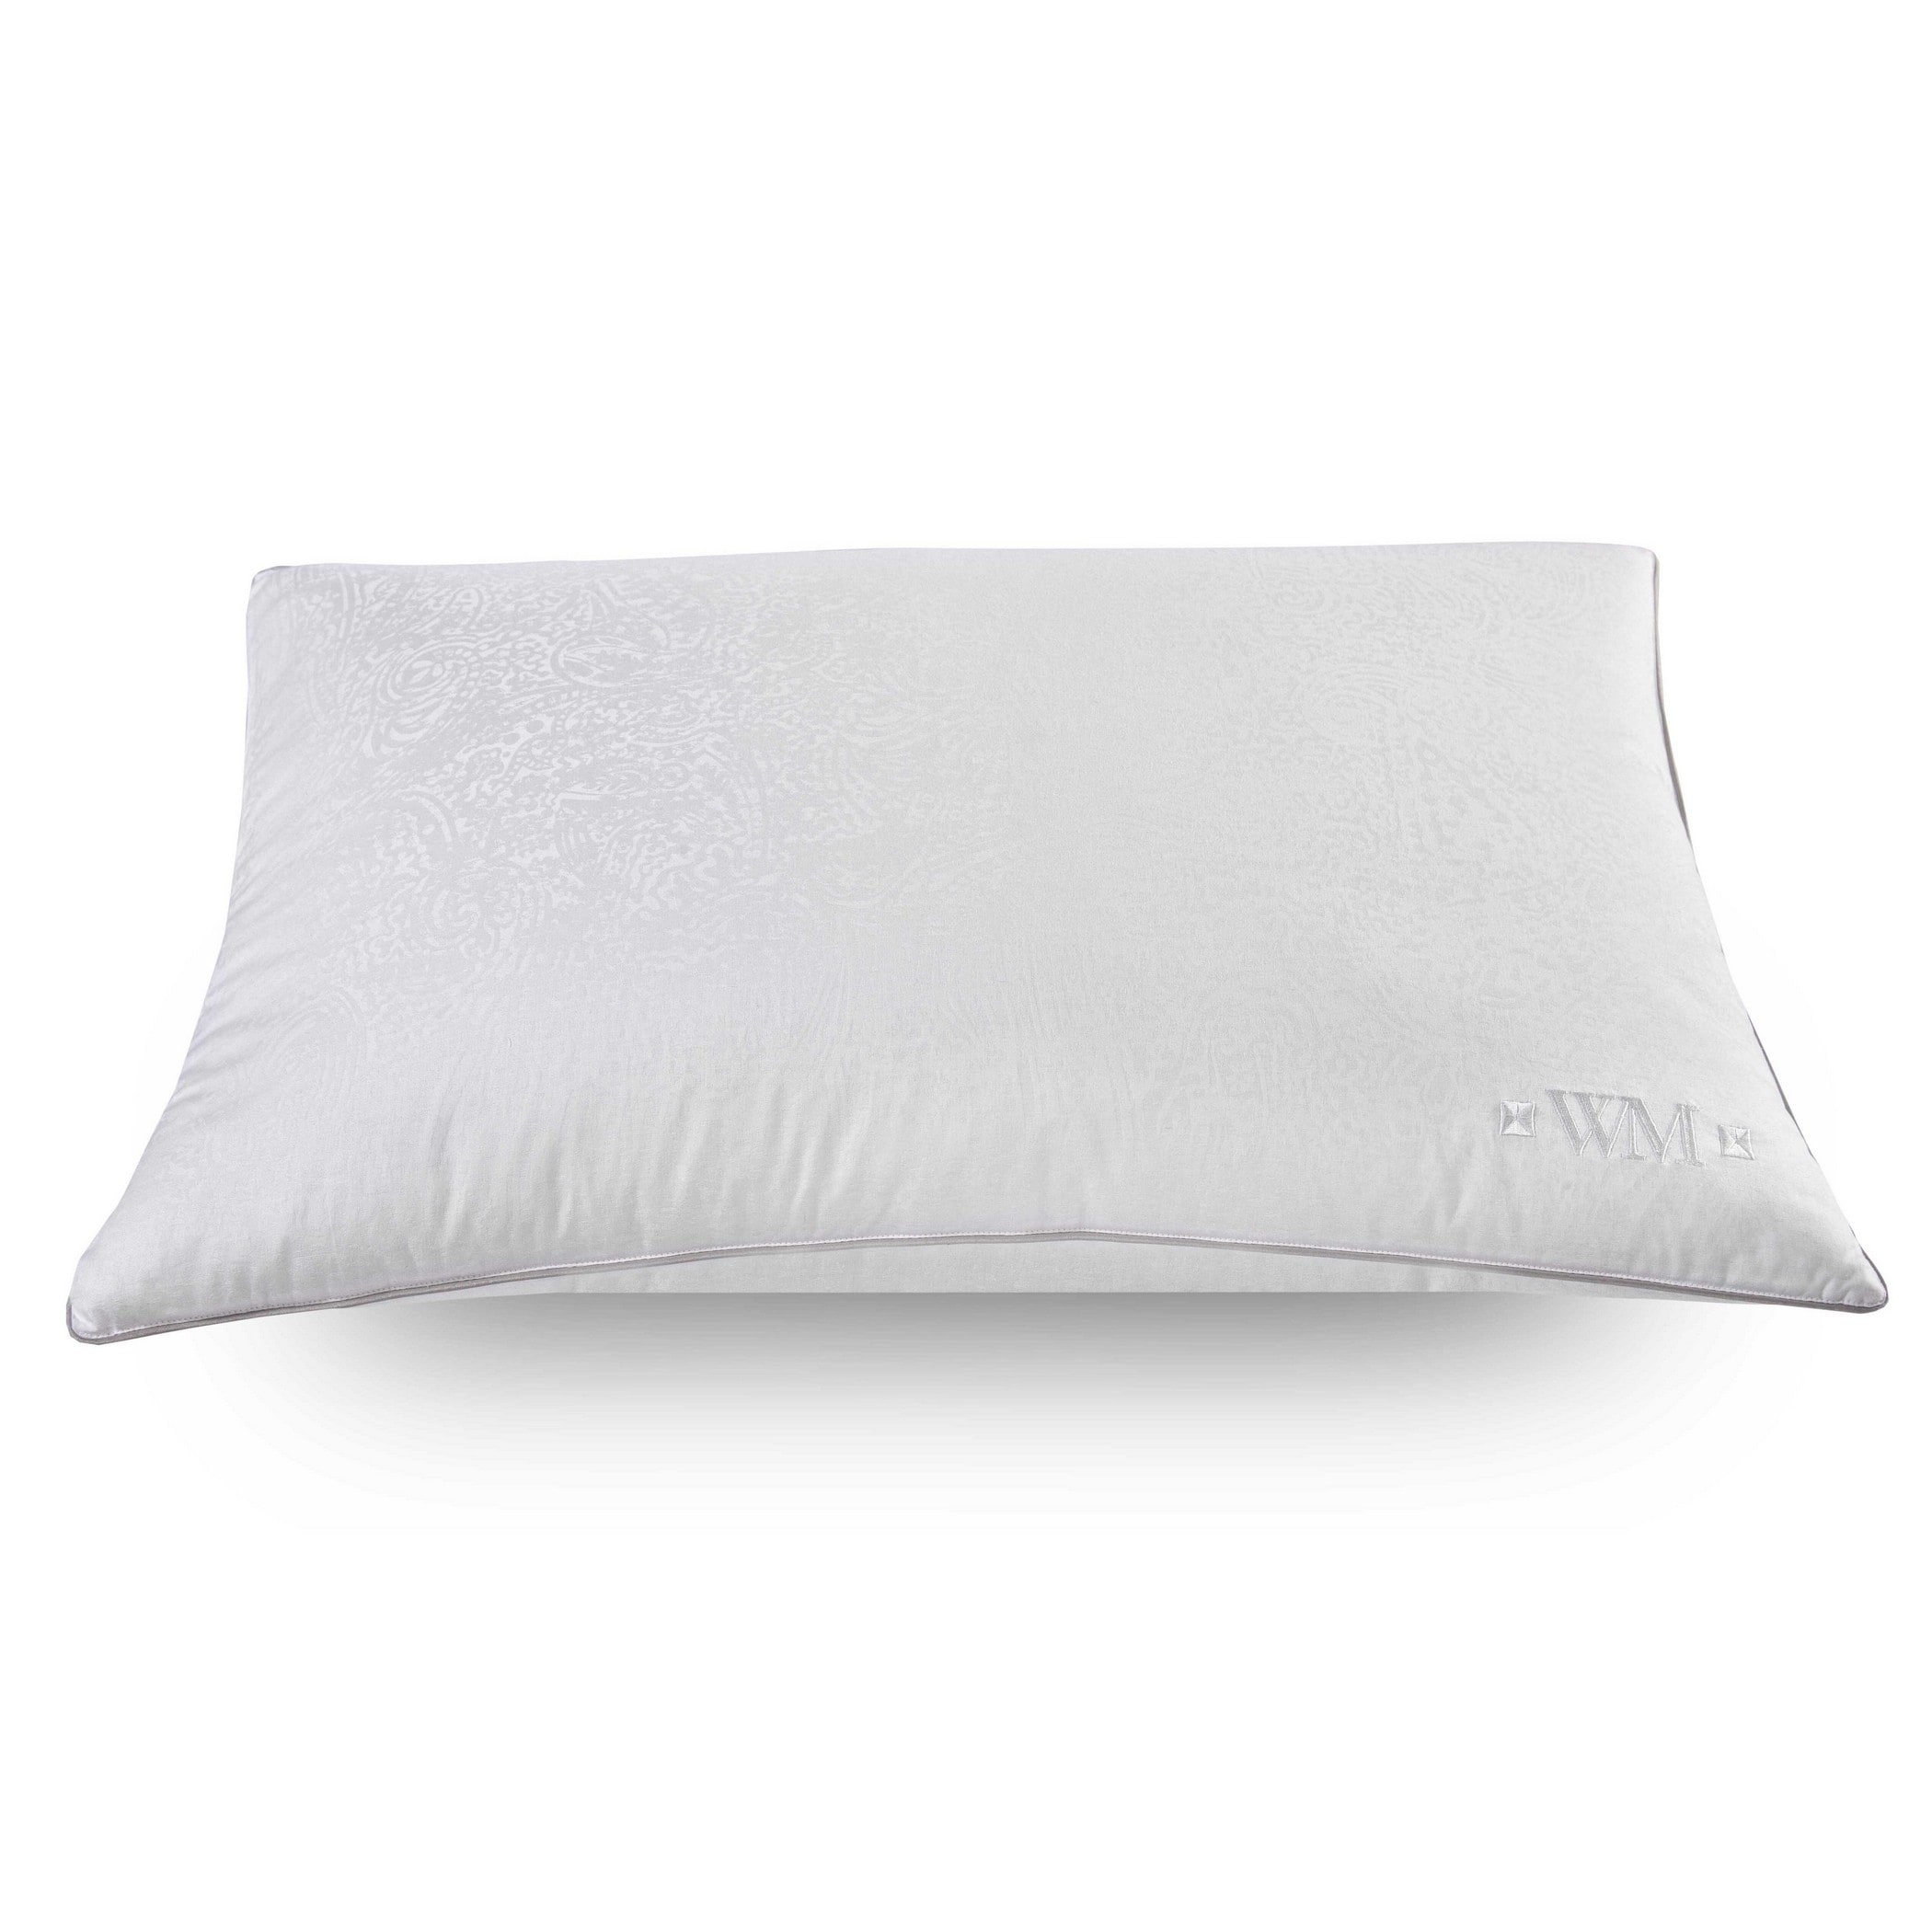 https://ak1.ostkcdn.com/images/products/28055959/Wesley-Mancini-Collection-Down-Blend-Jacquard-Gusseted-Pillow-with-Removable-Cover-White-bf51848b-2e00-48b1-b143-c29fdfd3b479.jpg